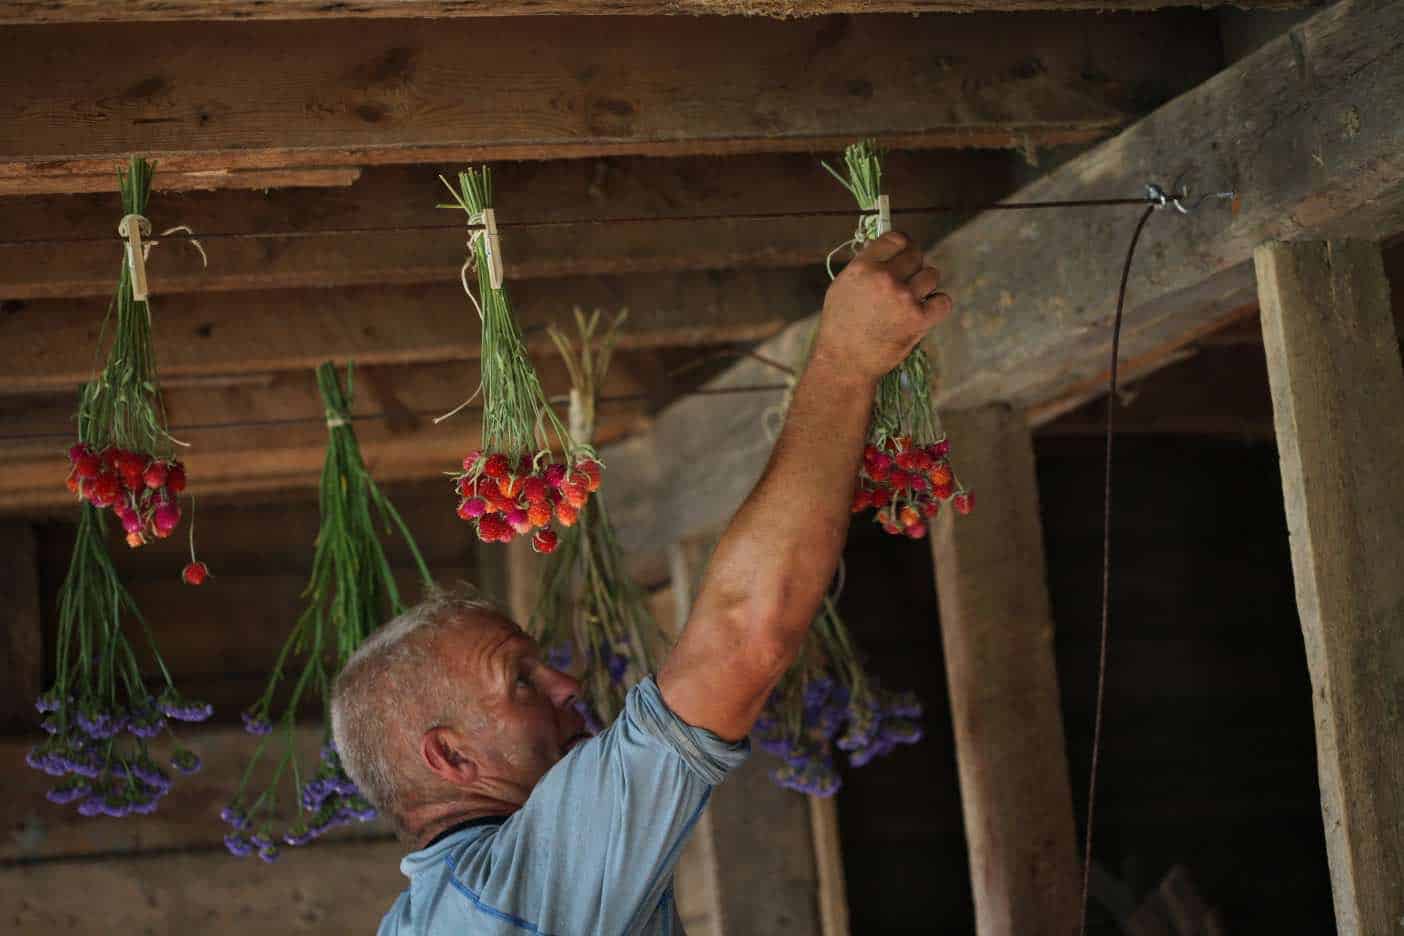 attaching flowers to a hanging line